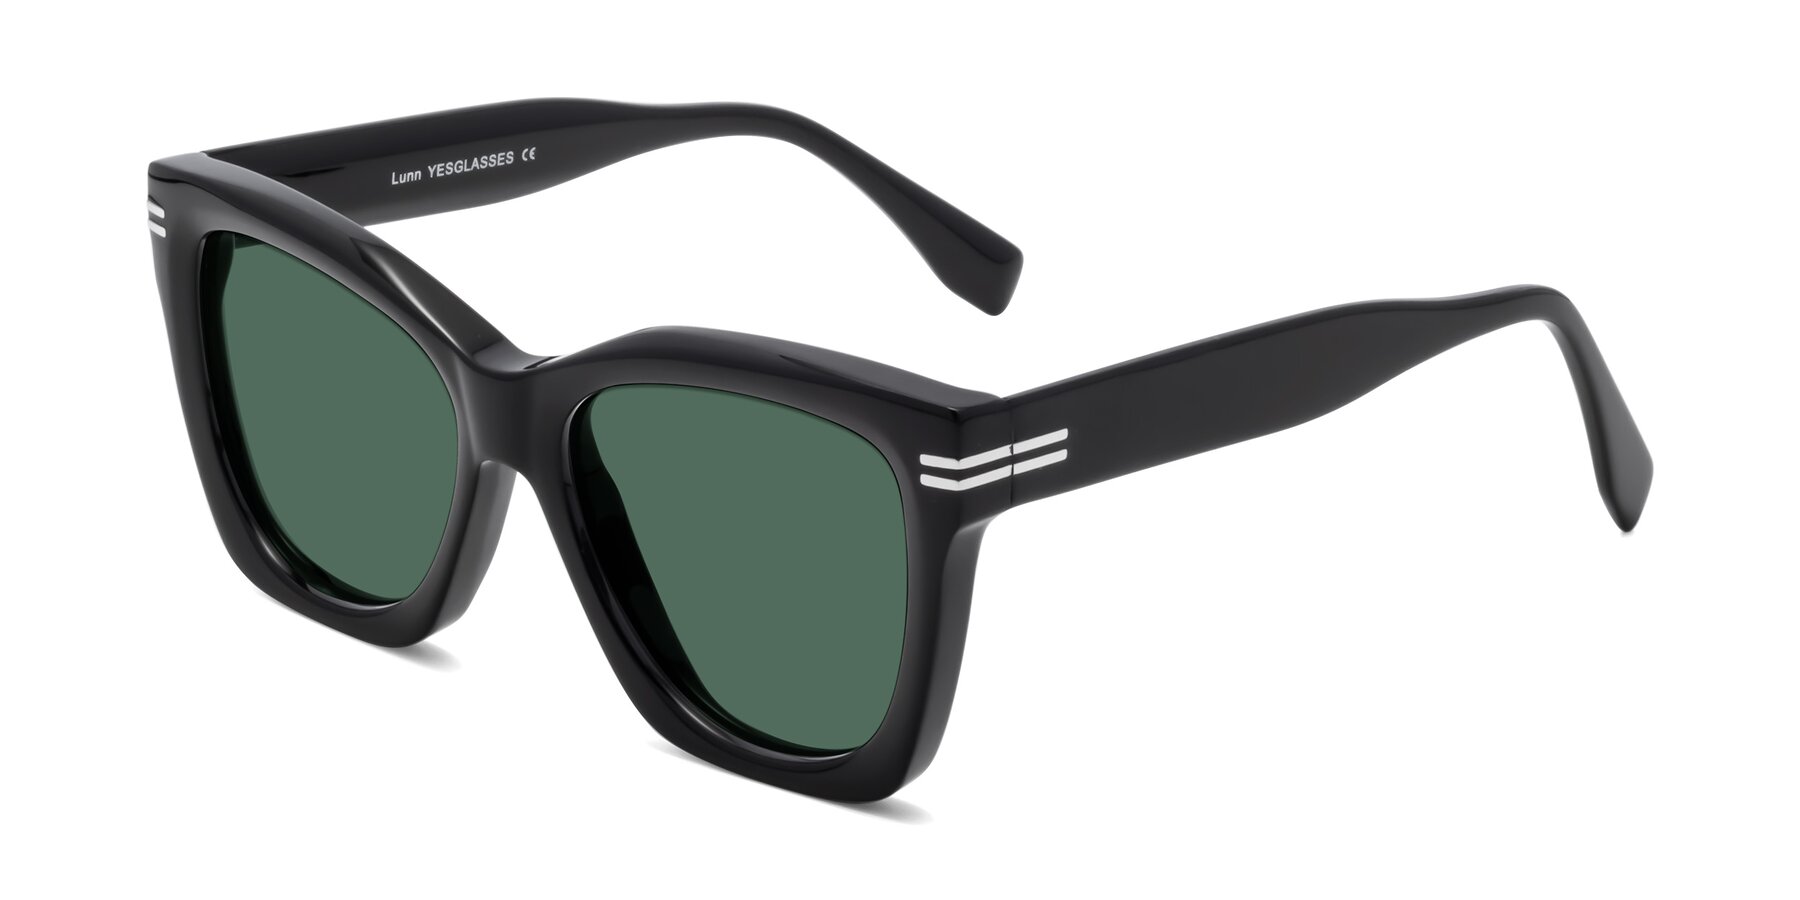 Angle of Lunn in Black with Green Polarized Lenses